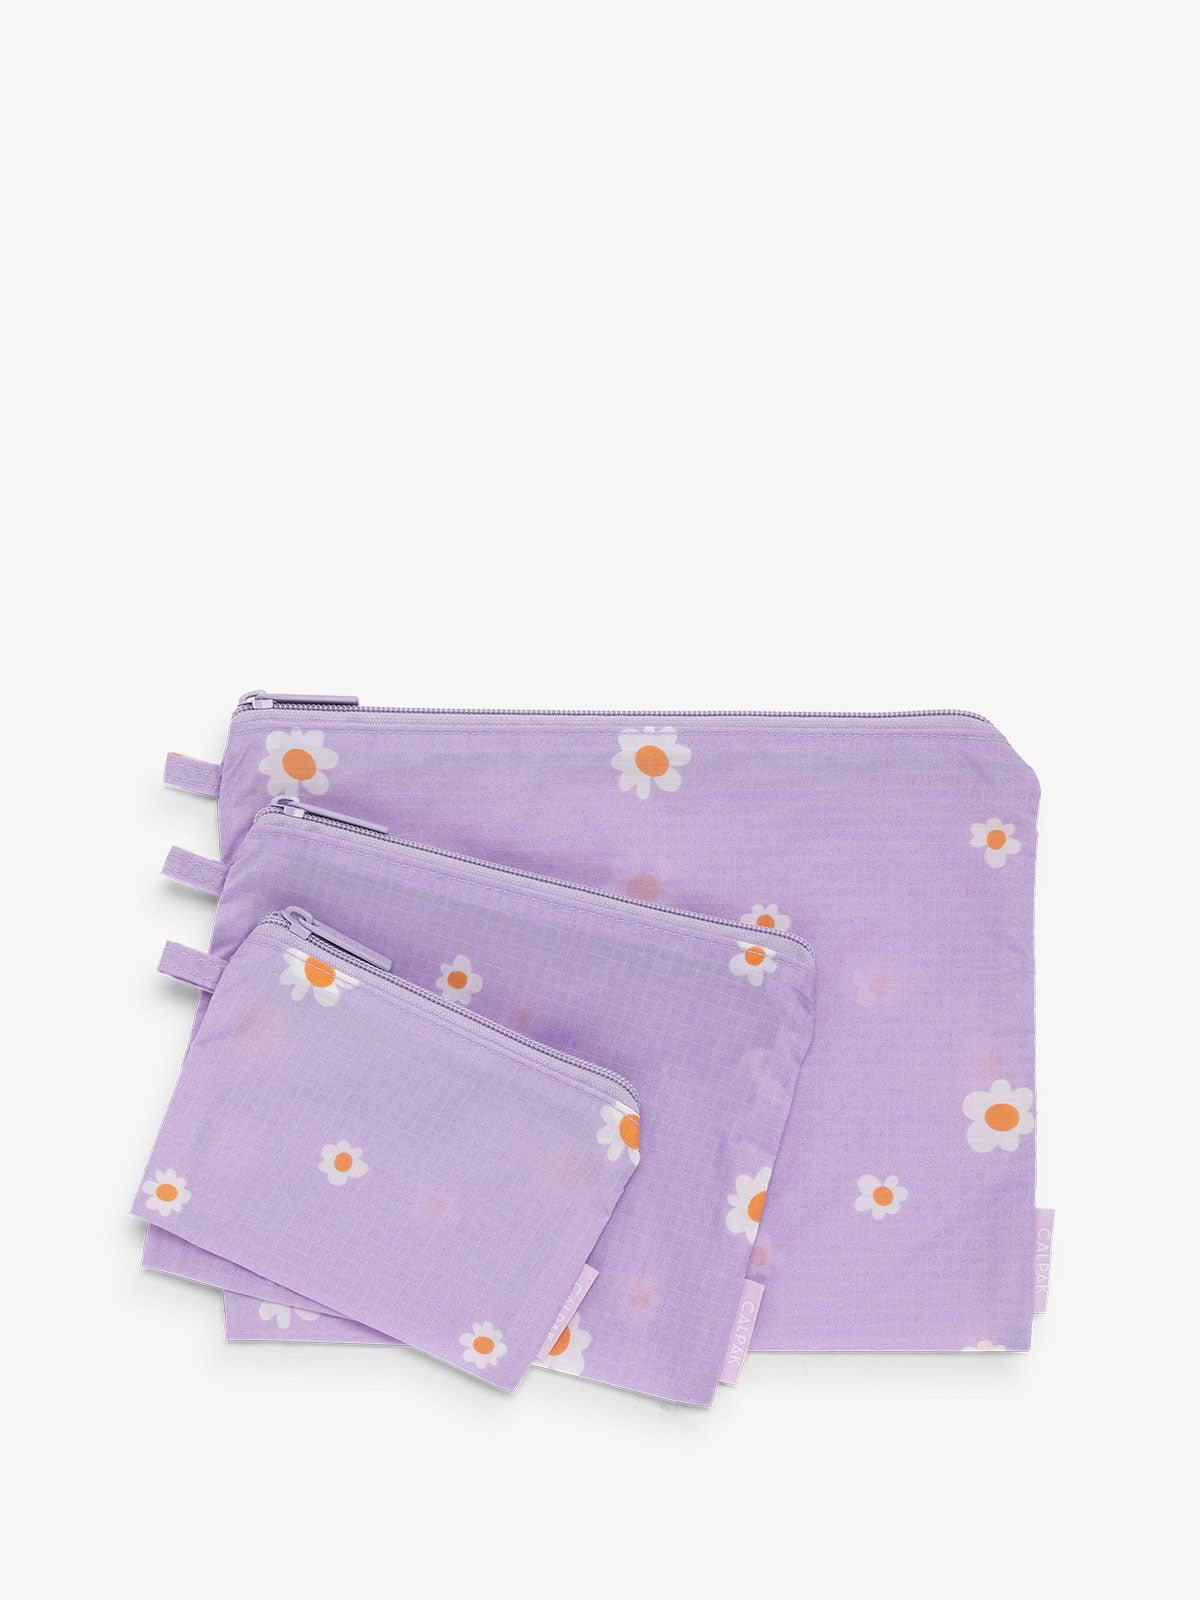 CALPAK Compakt zippered pouches in orchid fields